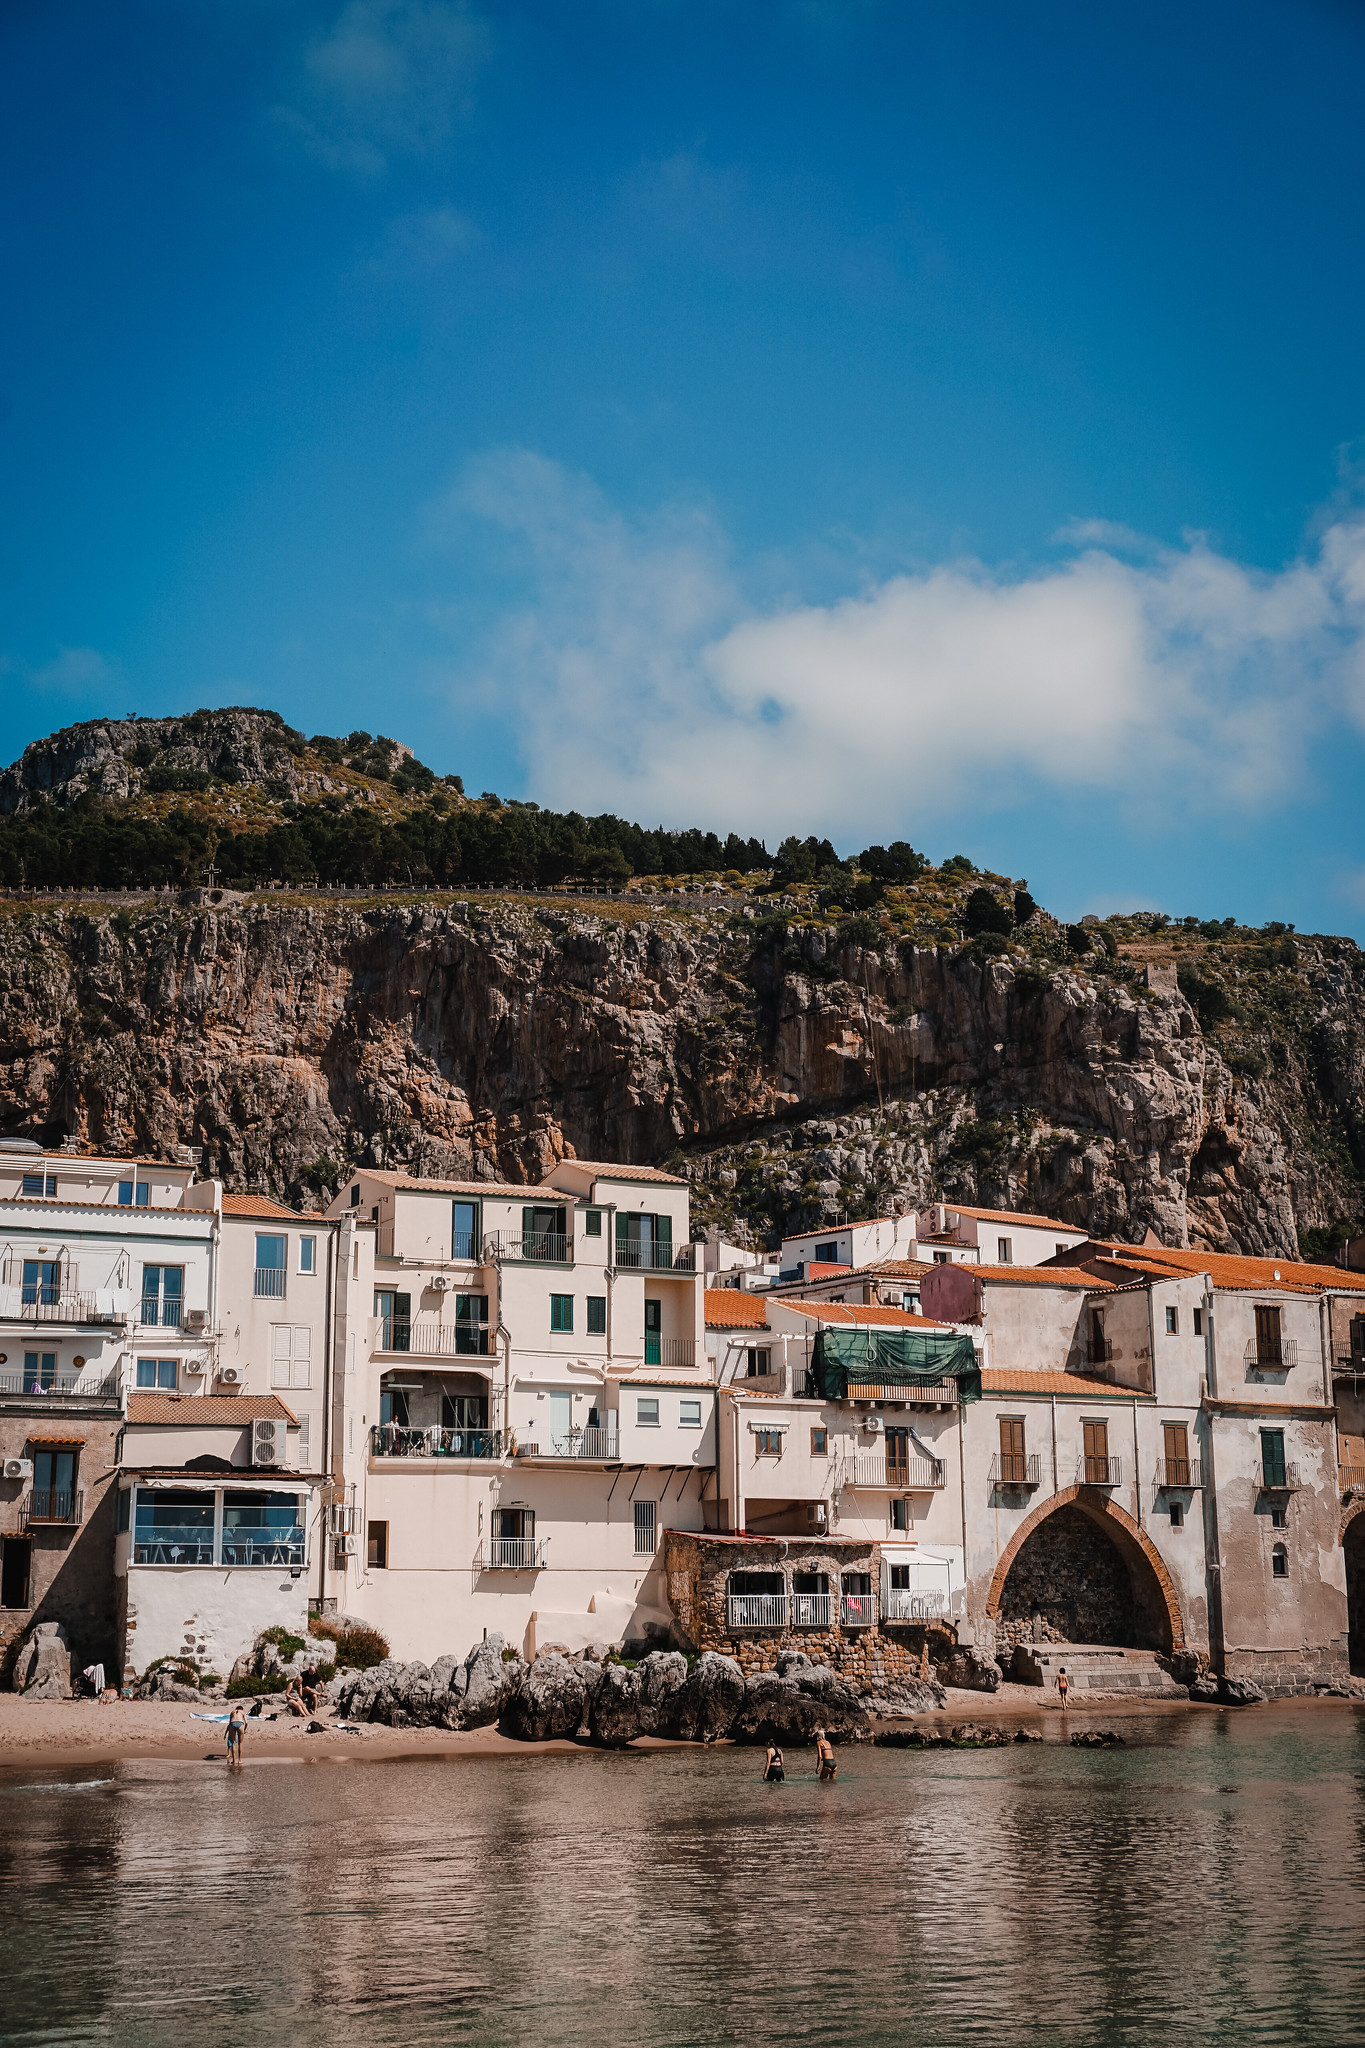 La Rocca as the backdrop of Cefalu | Explore the Picturesque Town of Cefalu | Cefalu Sicily Travel Guide | What to See, Do and Eat in Cefalu | Discover the Best Things to do in Cefalu, Sicily, Italy | Sicily Travel Tips | Visit Sicily